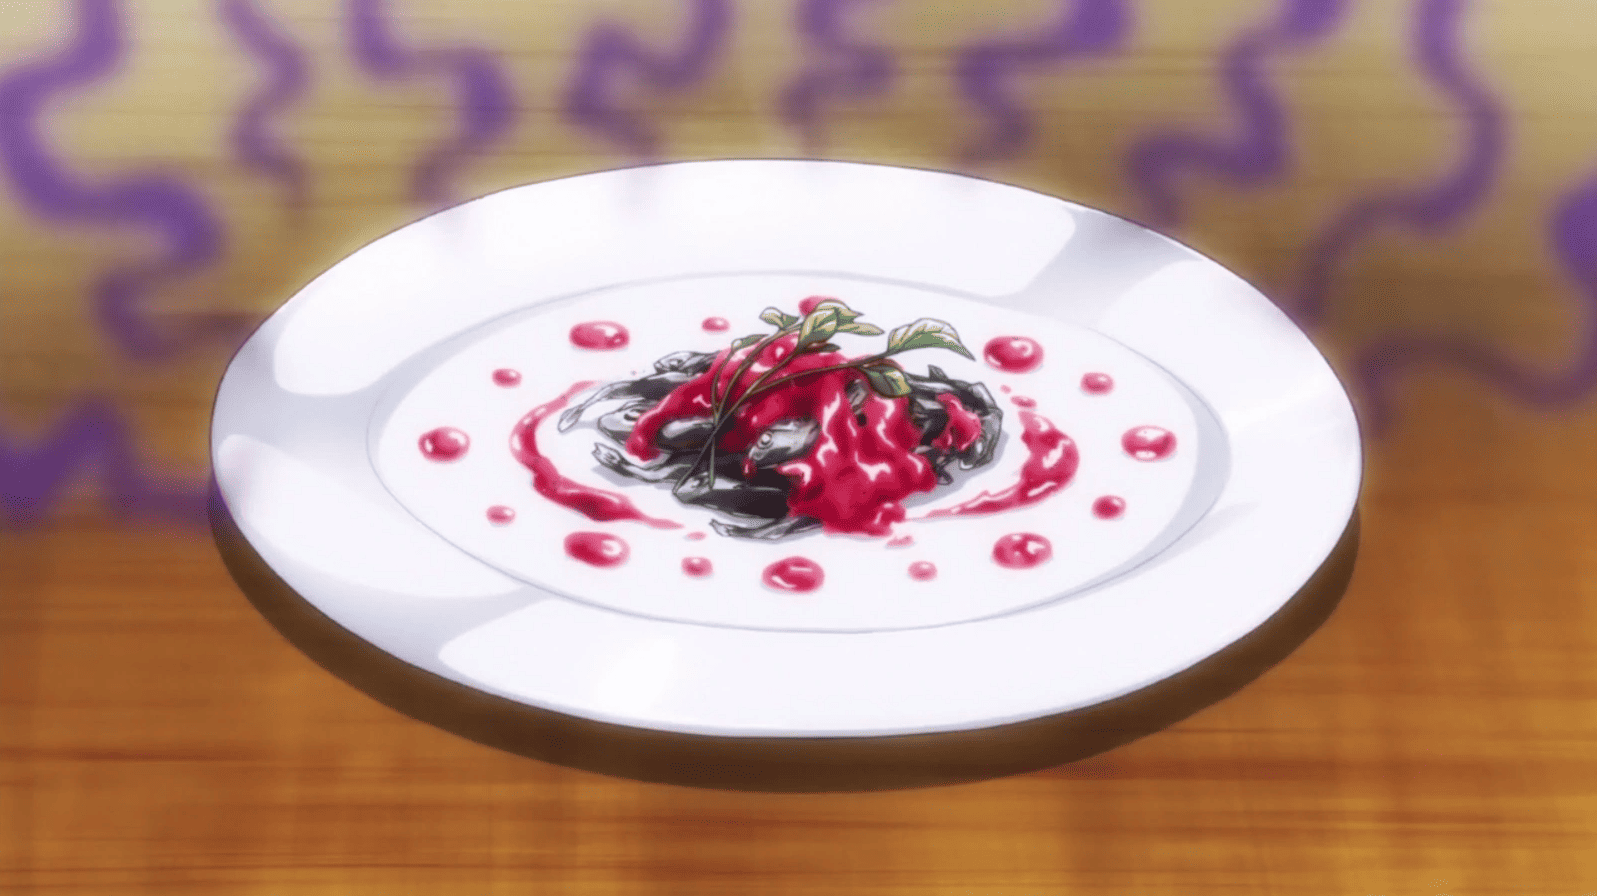 A plate of dried sardines and strawberry jam with a pungent odor in this image from J.C. Staff